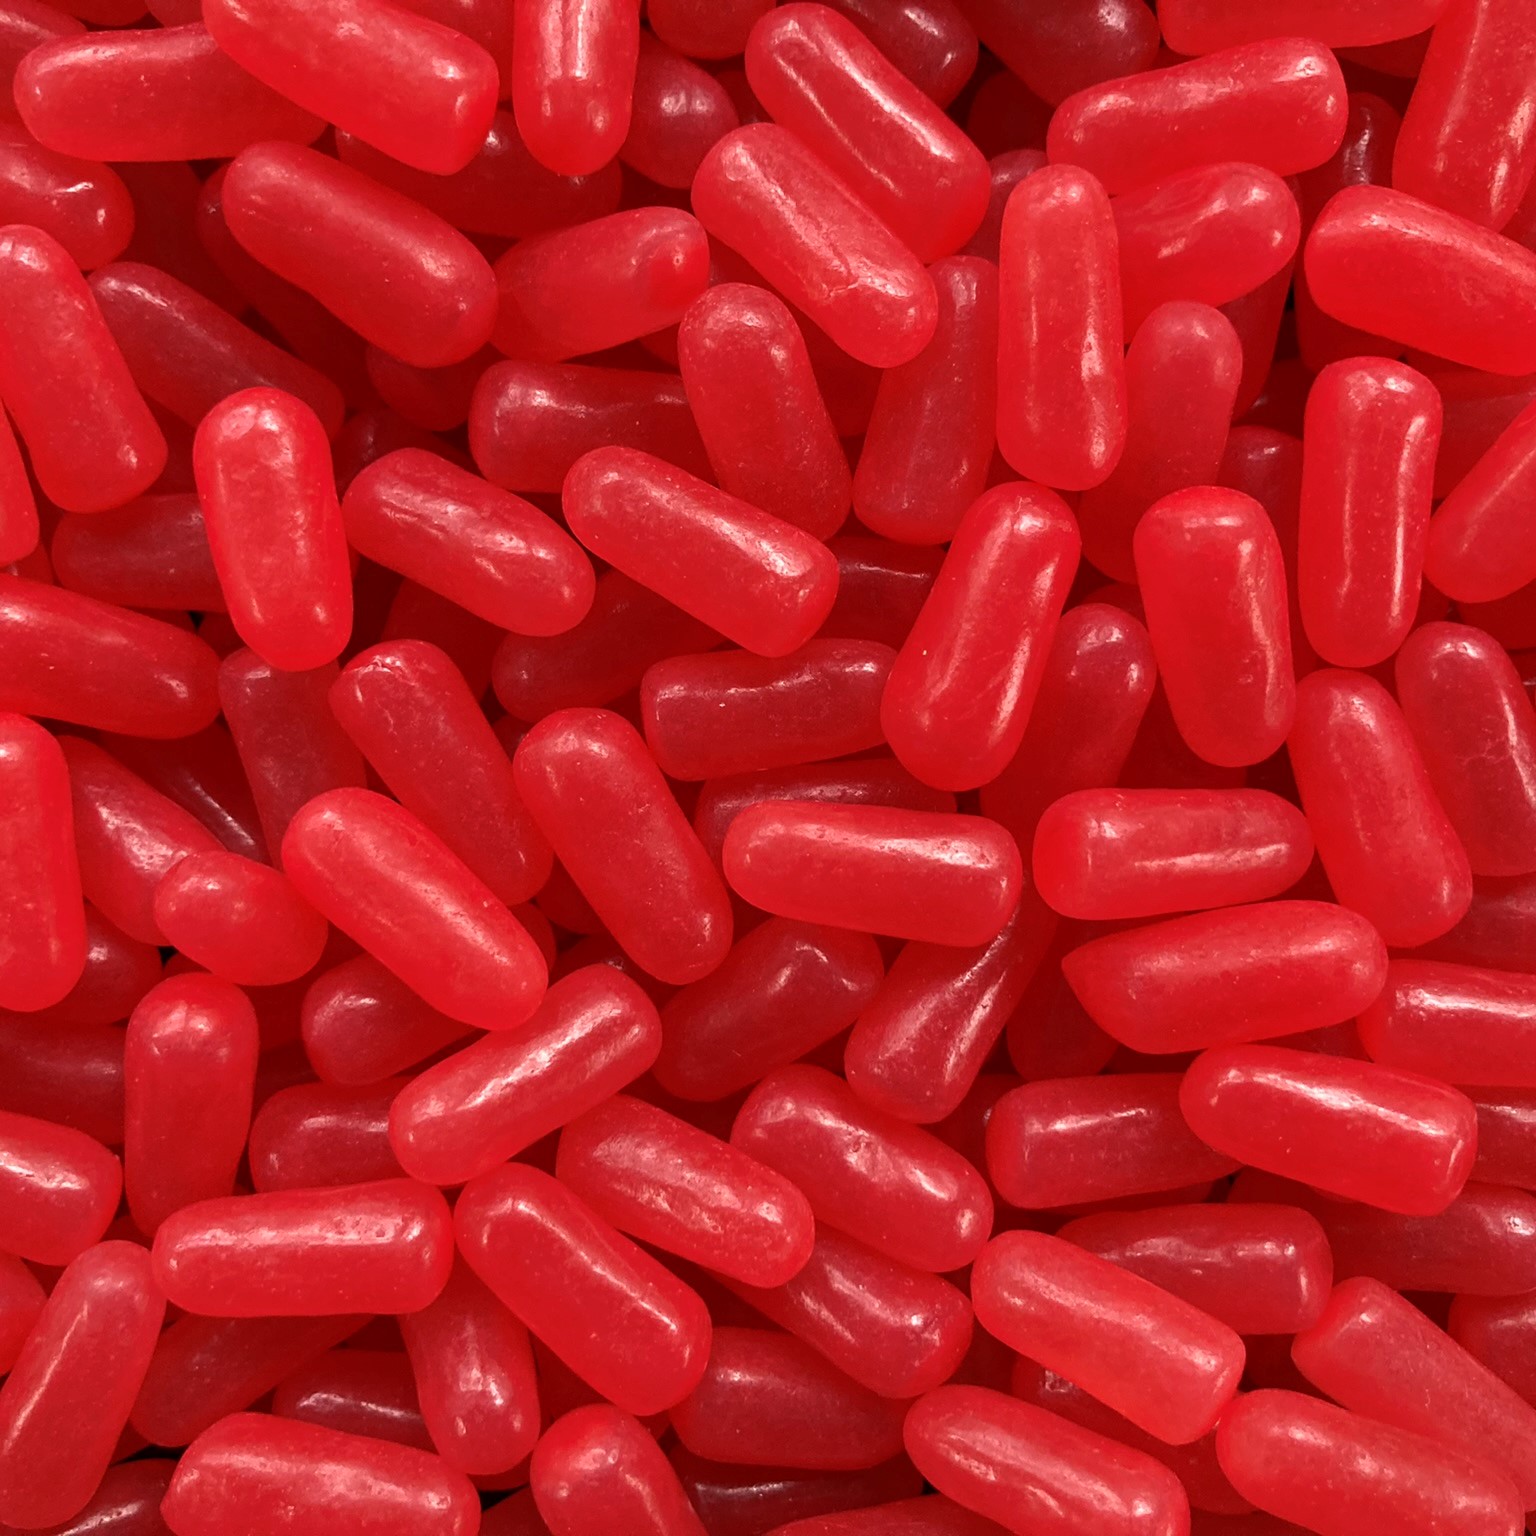 All Strawberry Pink Mike and Ike Candy - VillageCandyShop.com